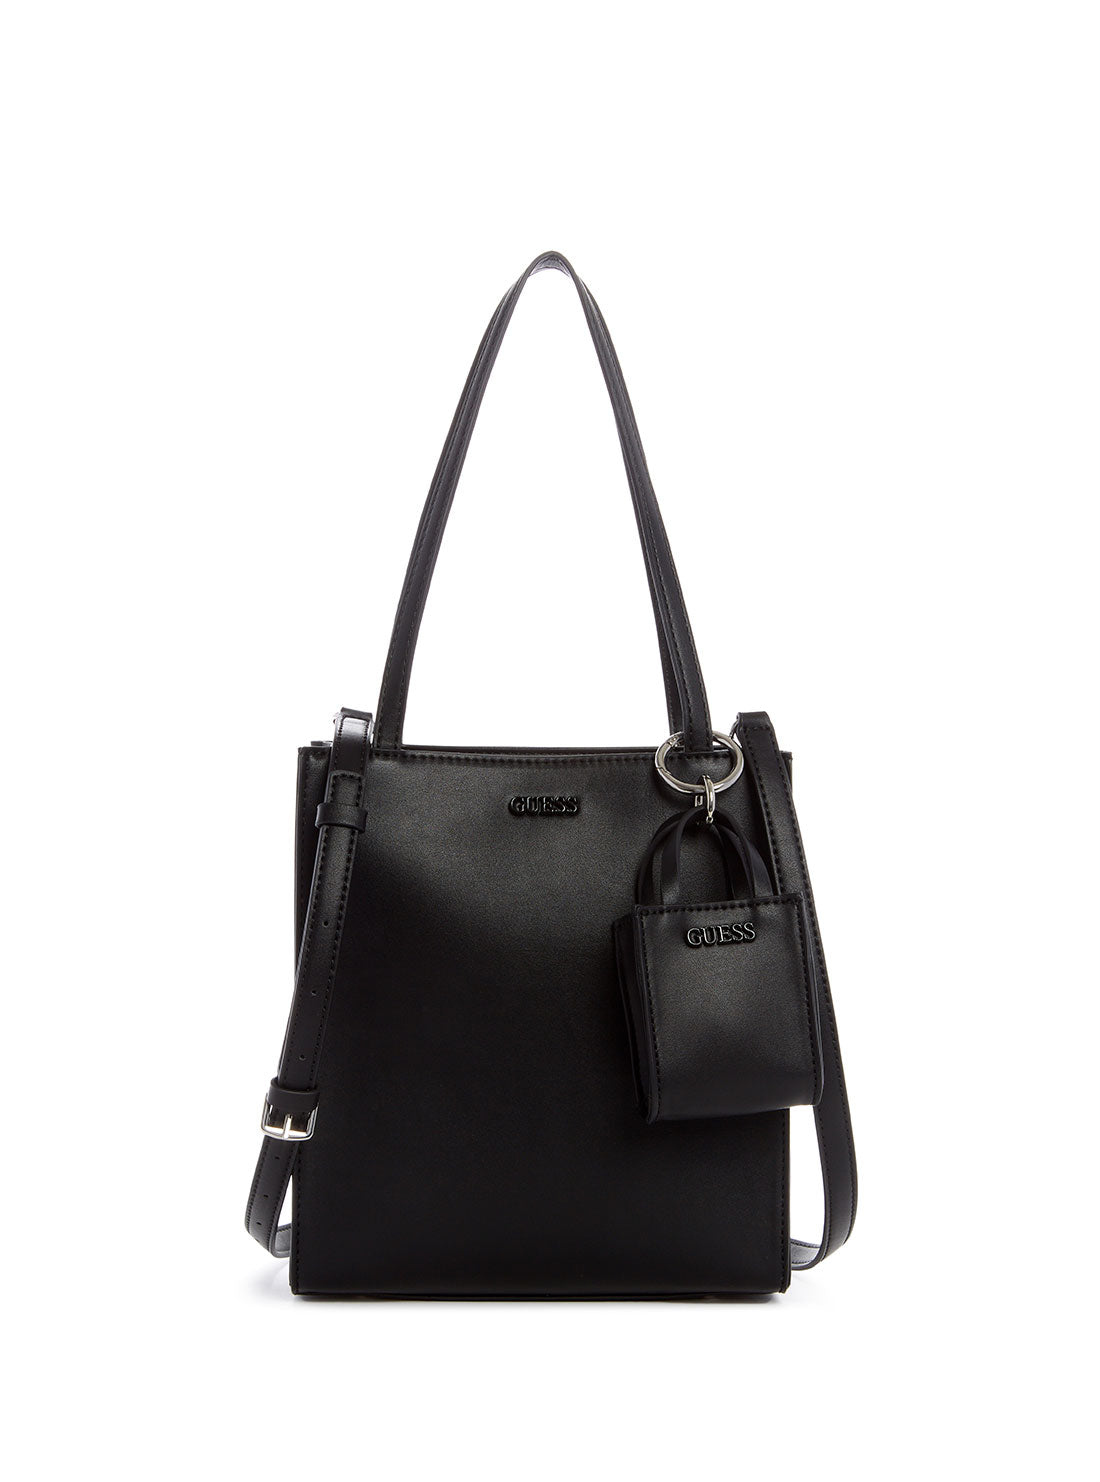 GUESS Women's Black Picnic Tote Bag VY786522 Front View